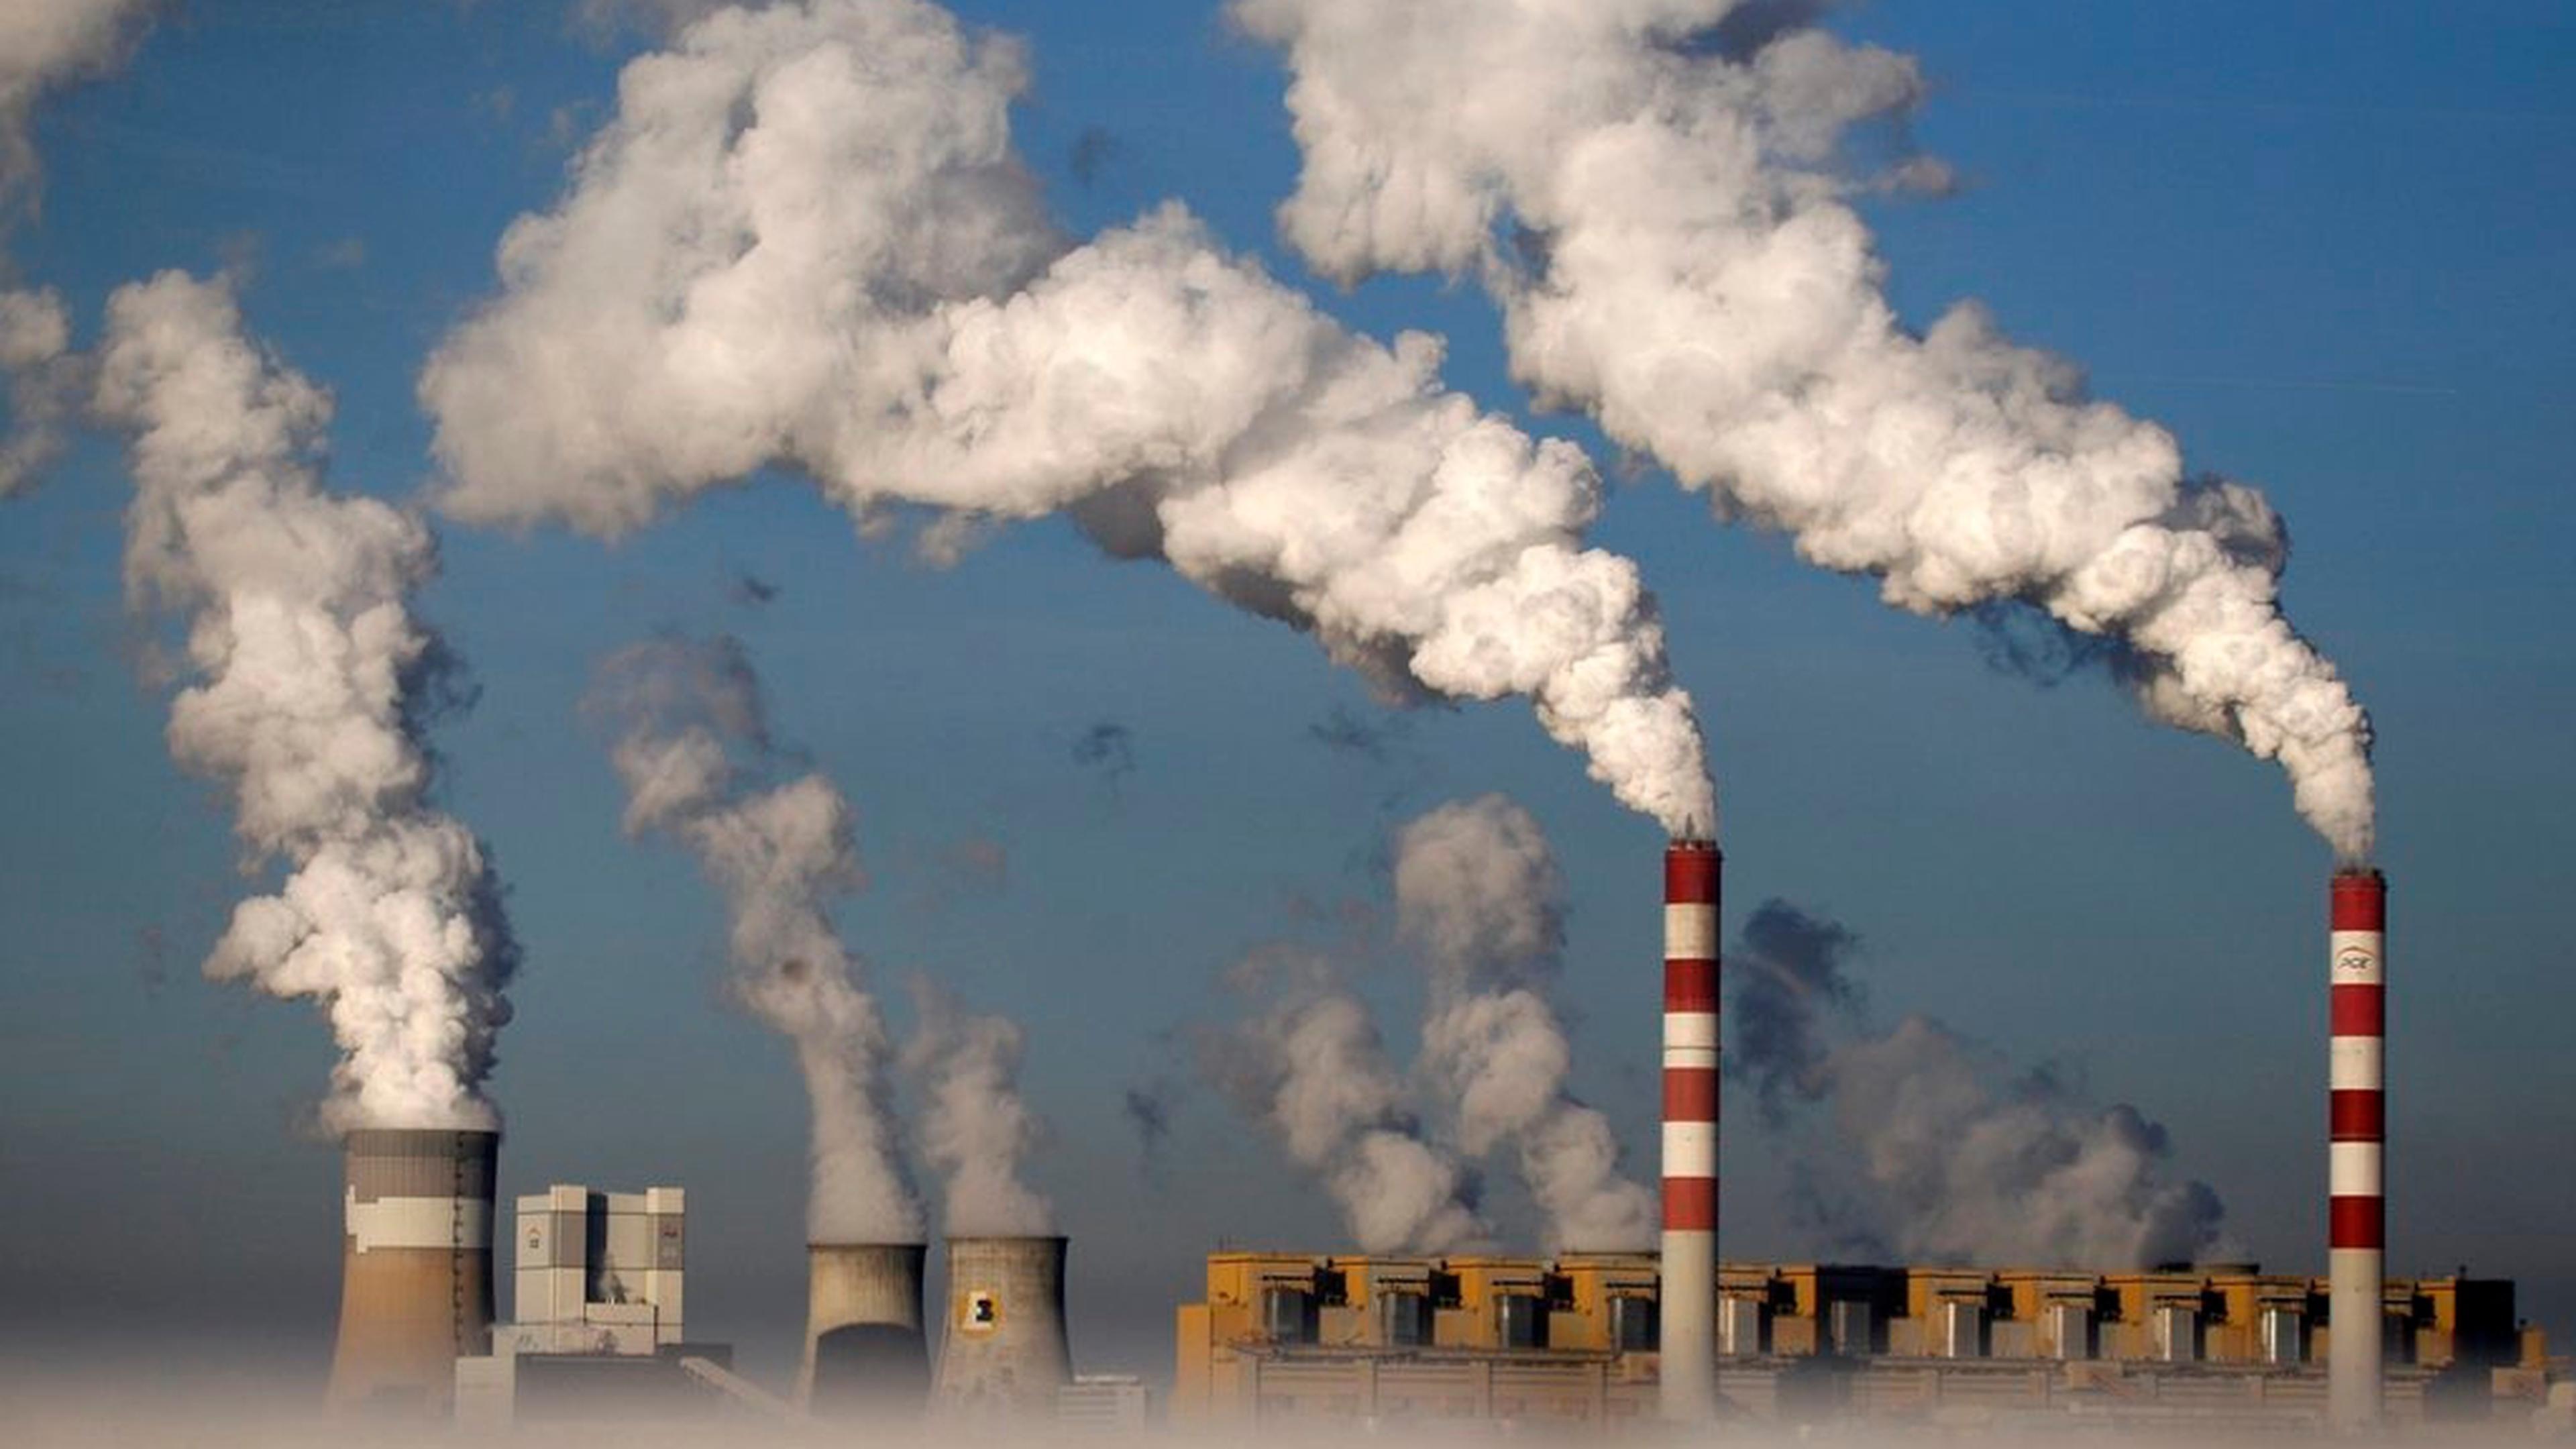 Smoke billows from the chimneys of the Belchatow Power Station in Poland, Europe's largest coal-fired power plant